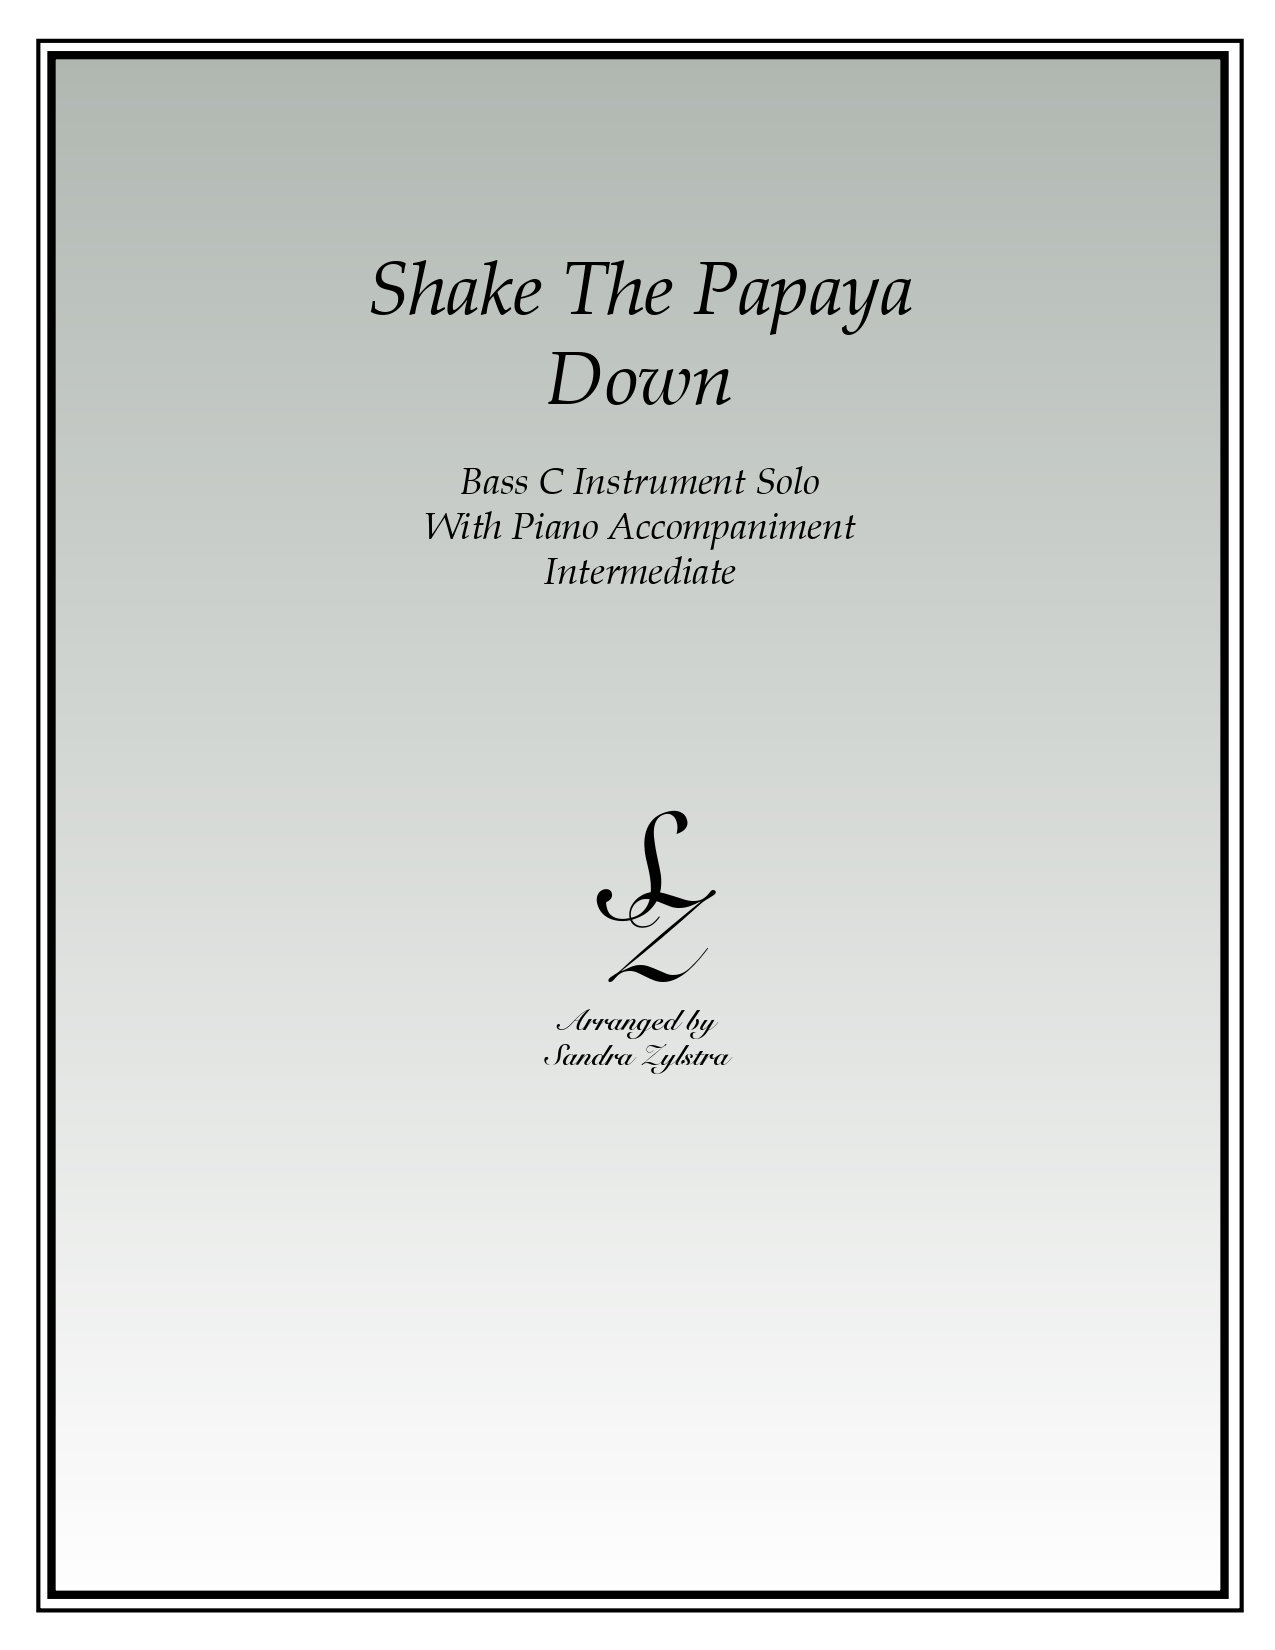 Shake The Papaya Down bass C instrument solo part cover page 00011